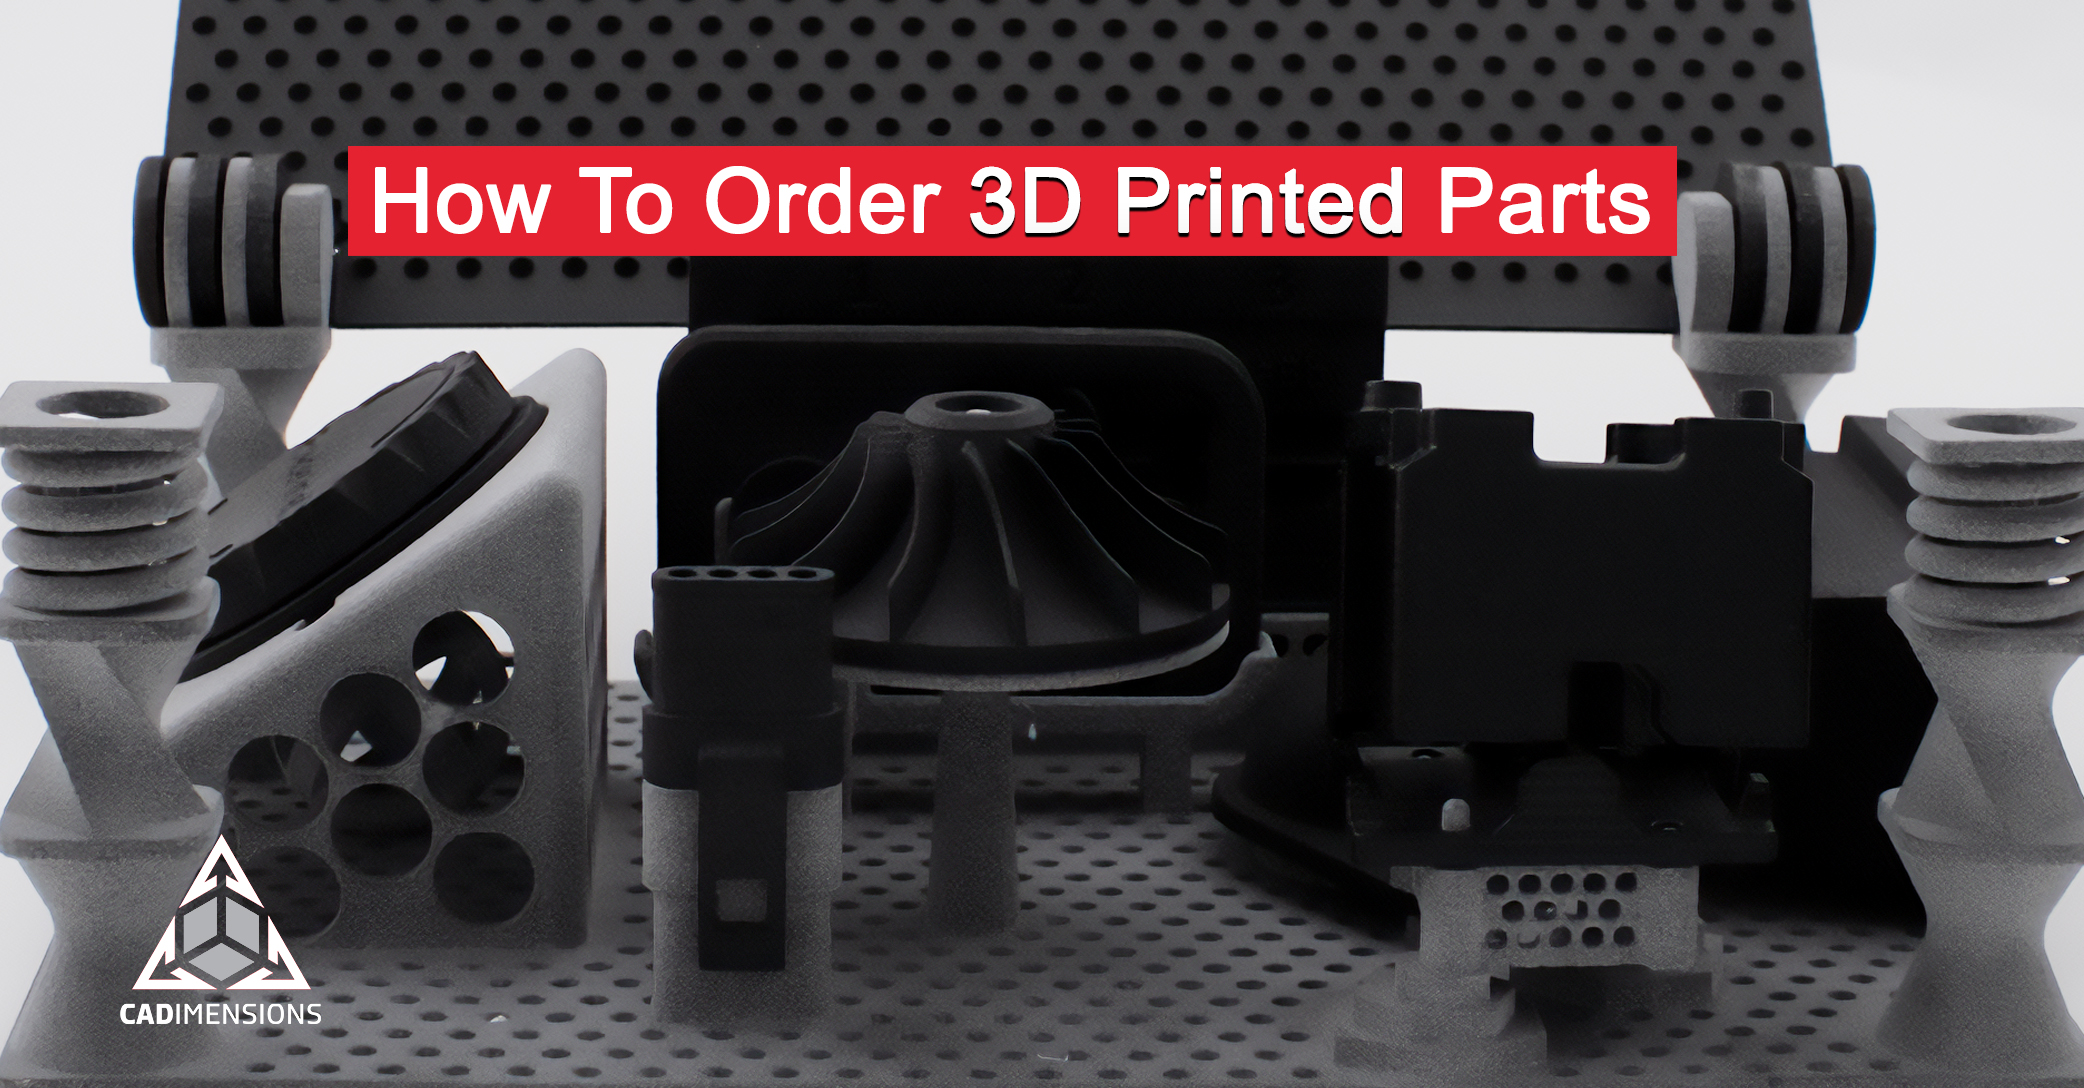 How To Order 3D Printed Parts